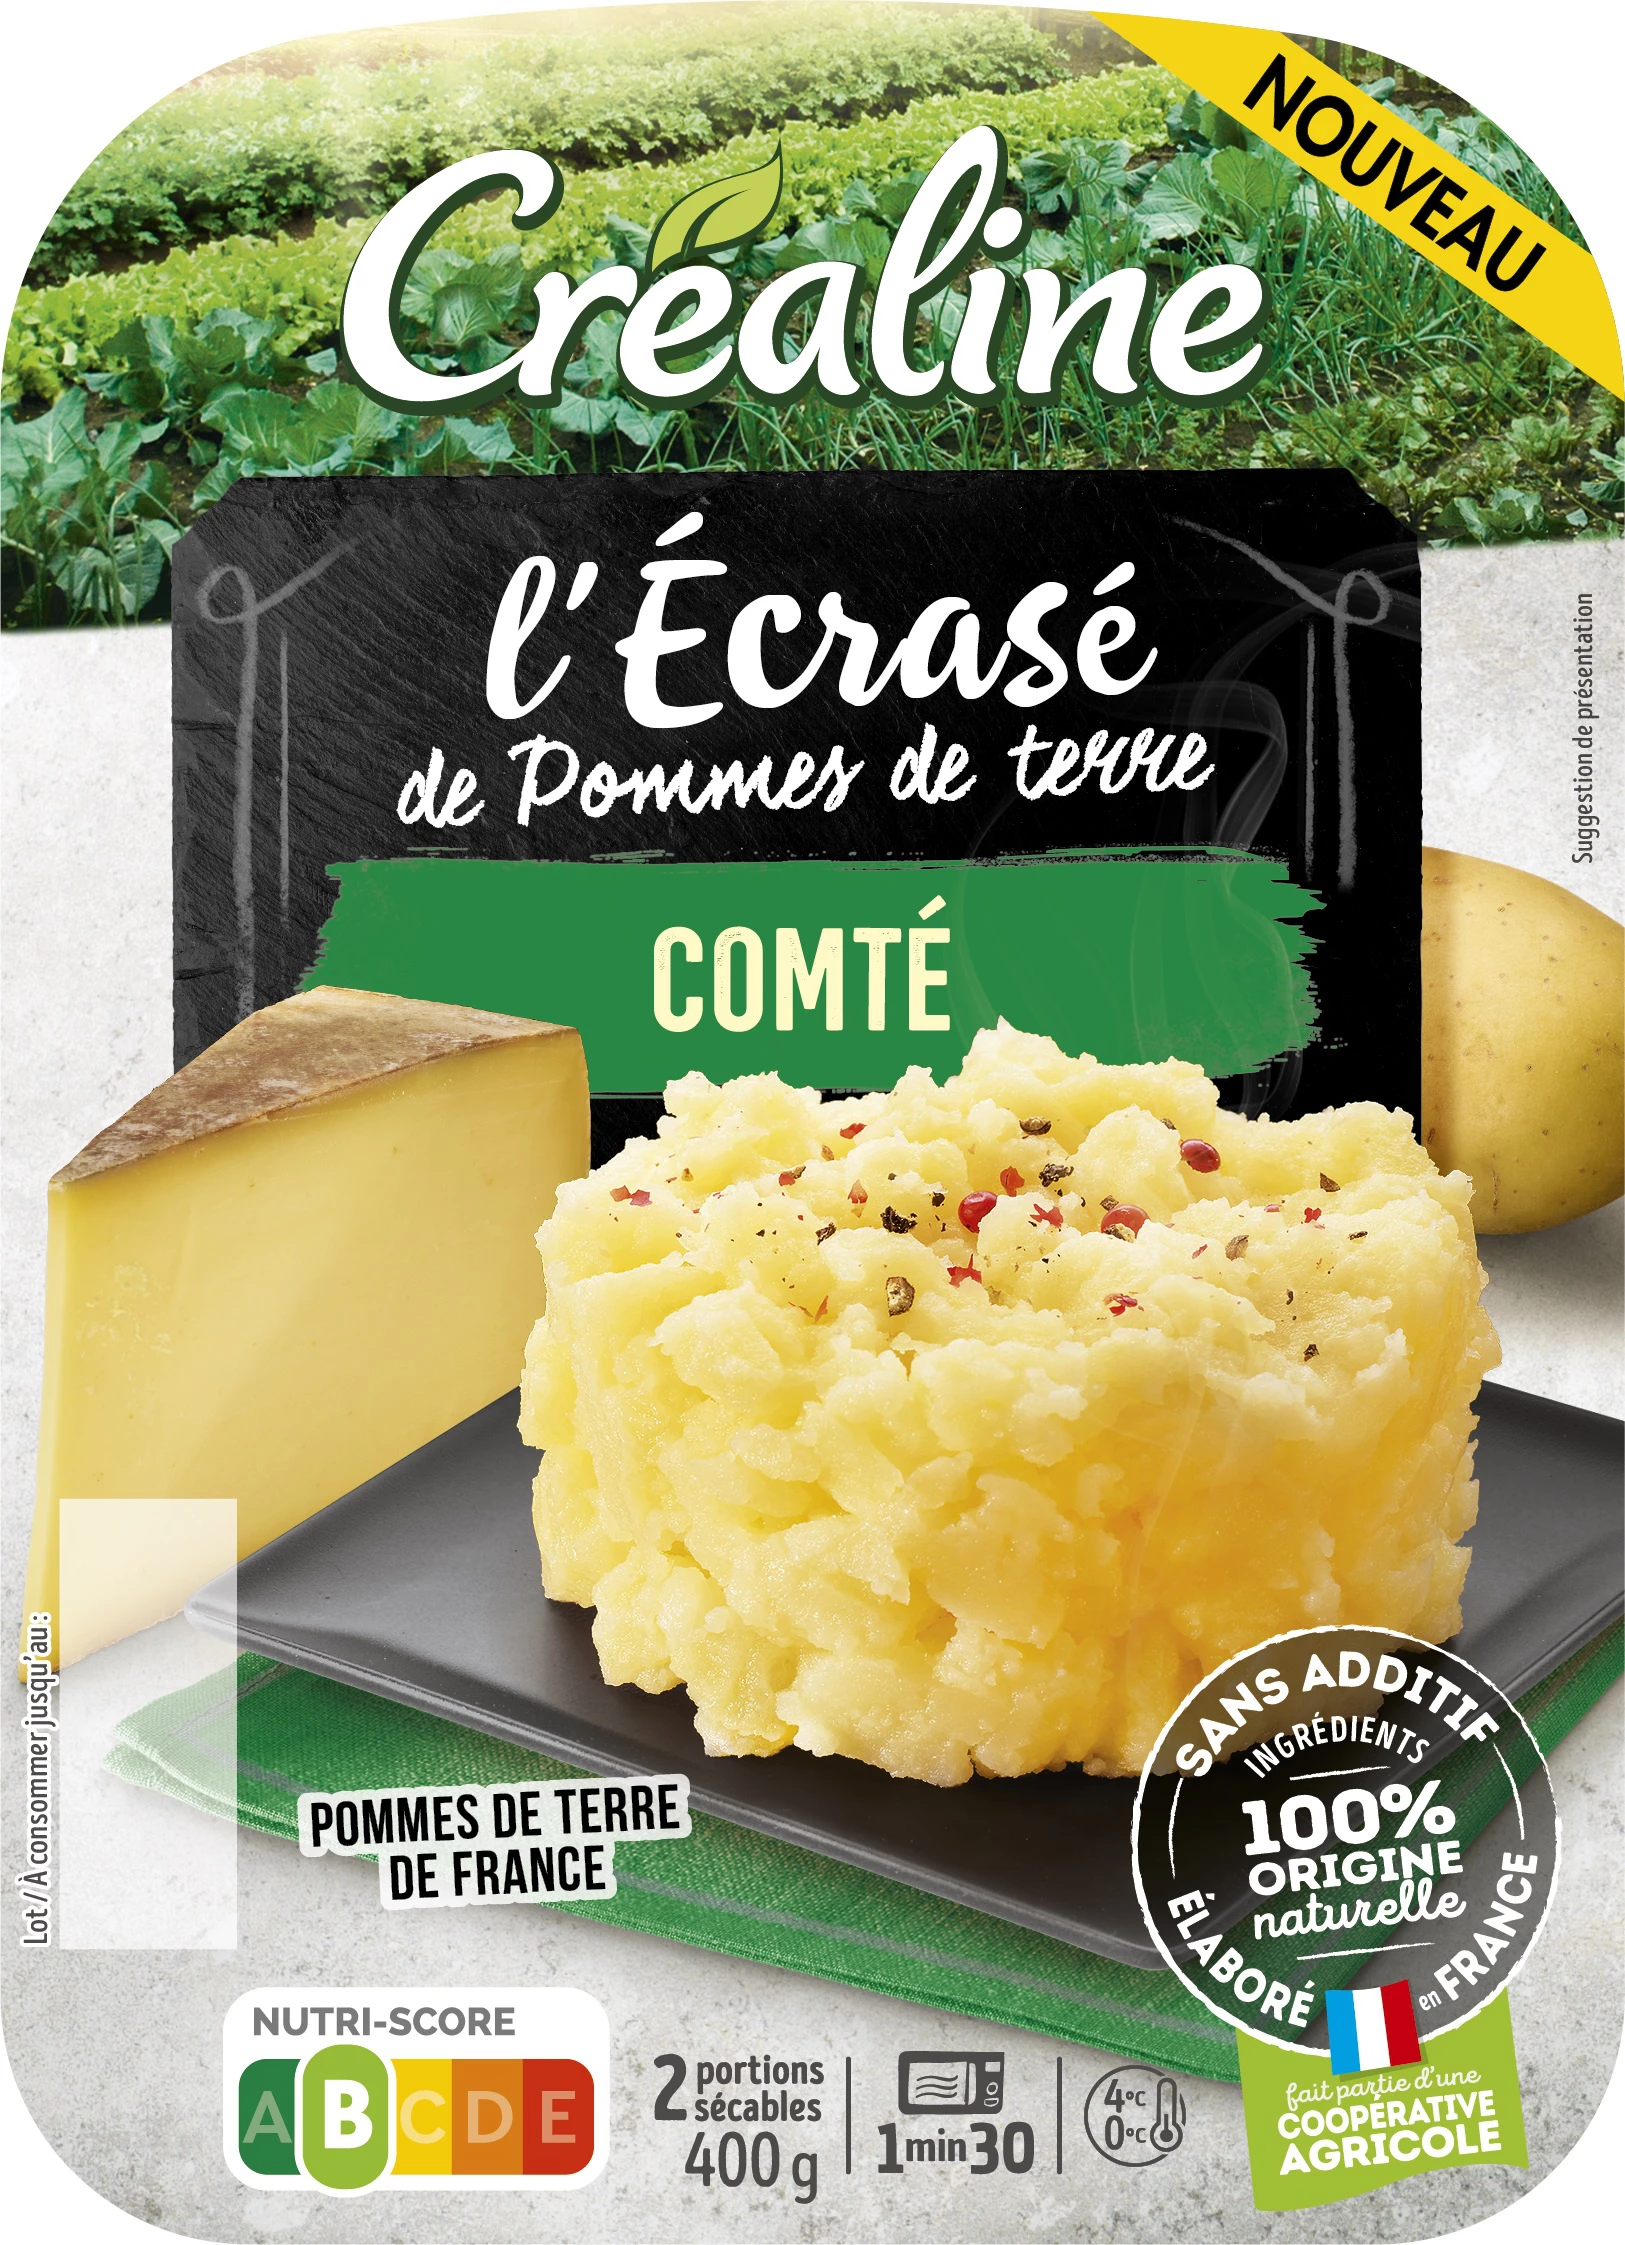 Mashed Potatoes With Comte Cheese 2x200g